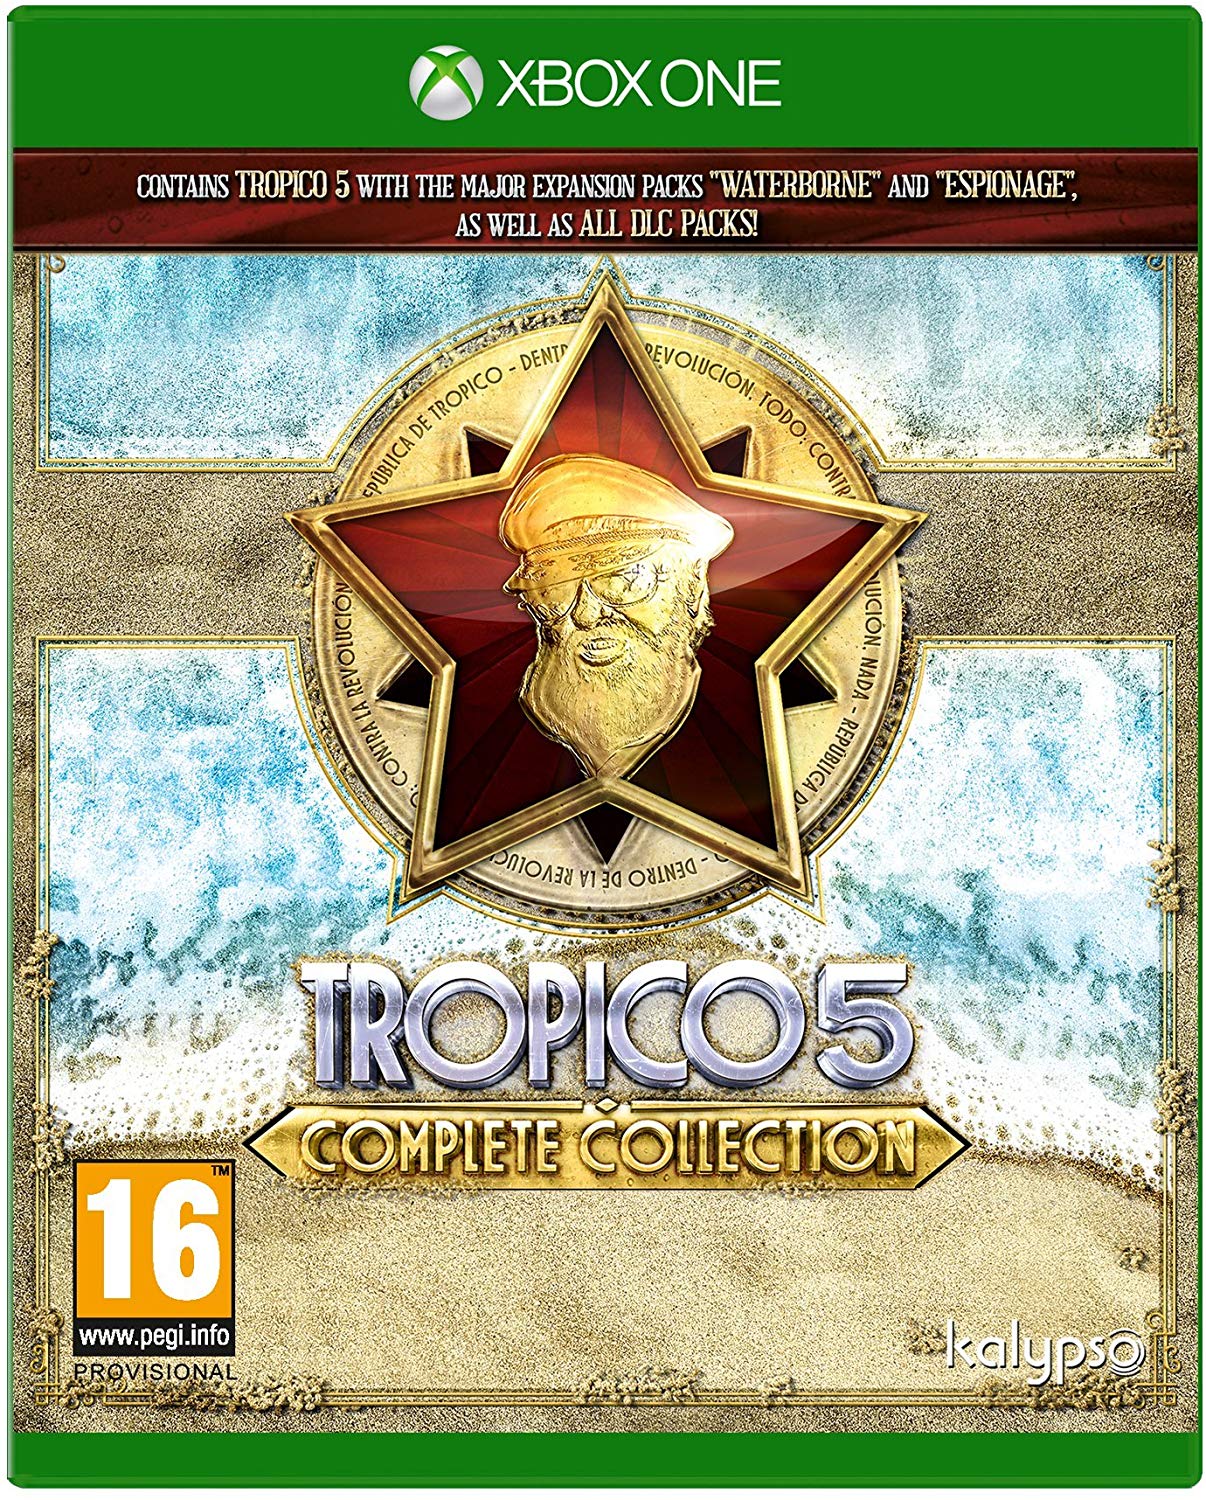 Tropico 5 Complete Collection XBOX ONE